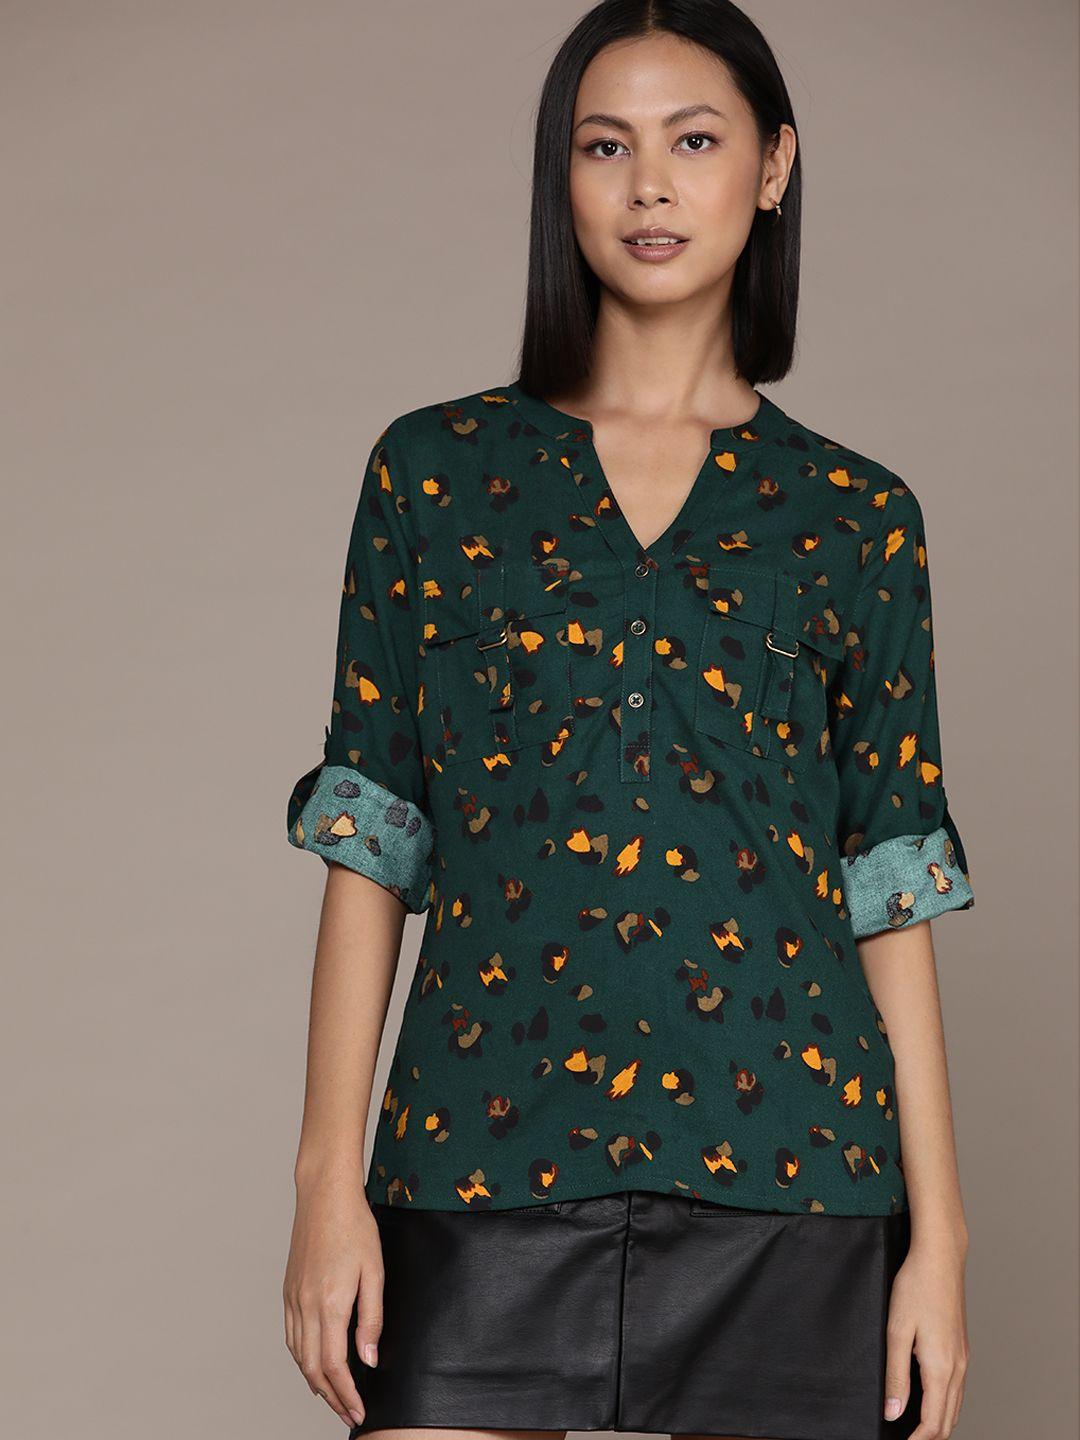 roadster printed roll-up sleeves shirt style top